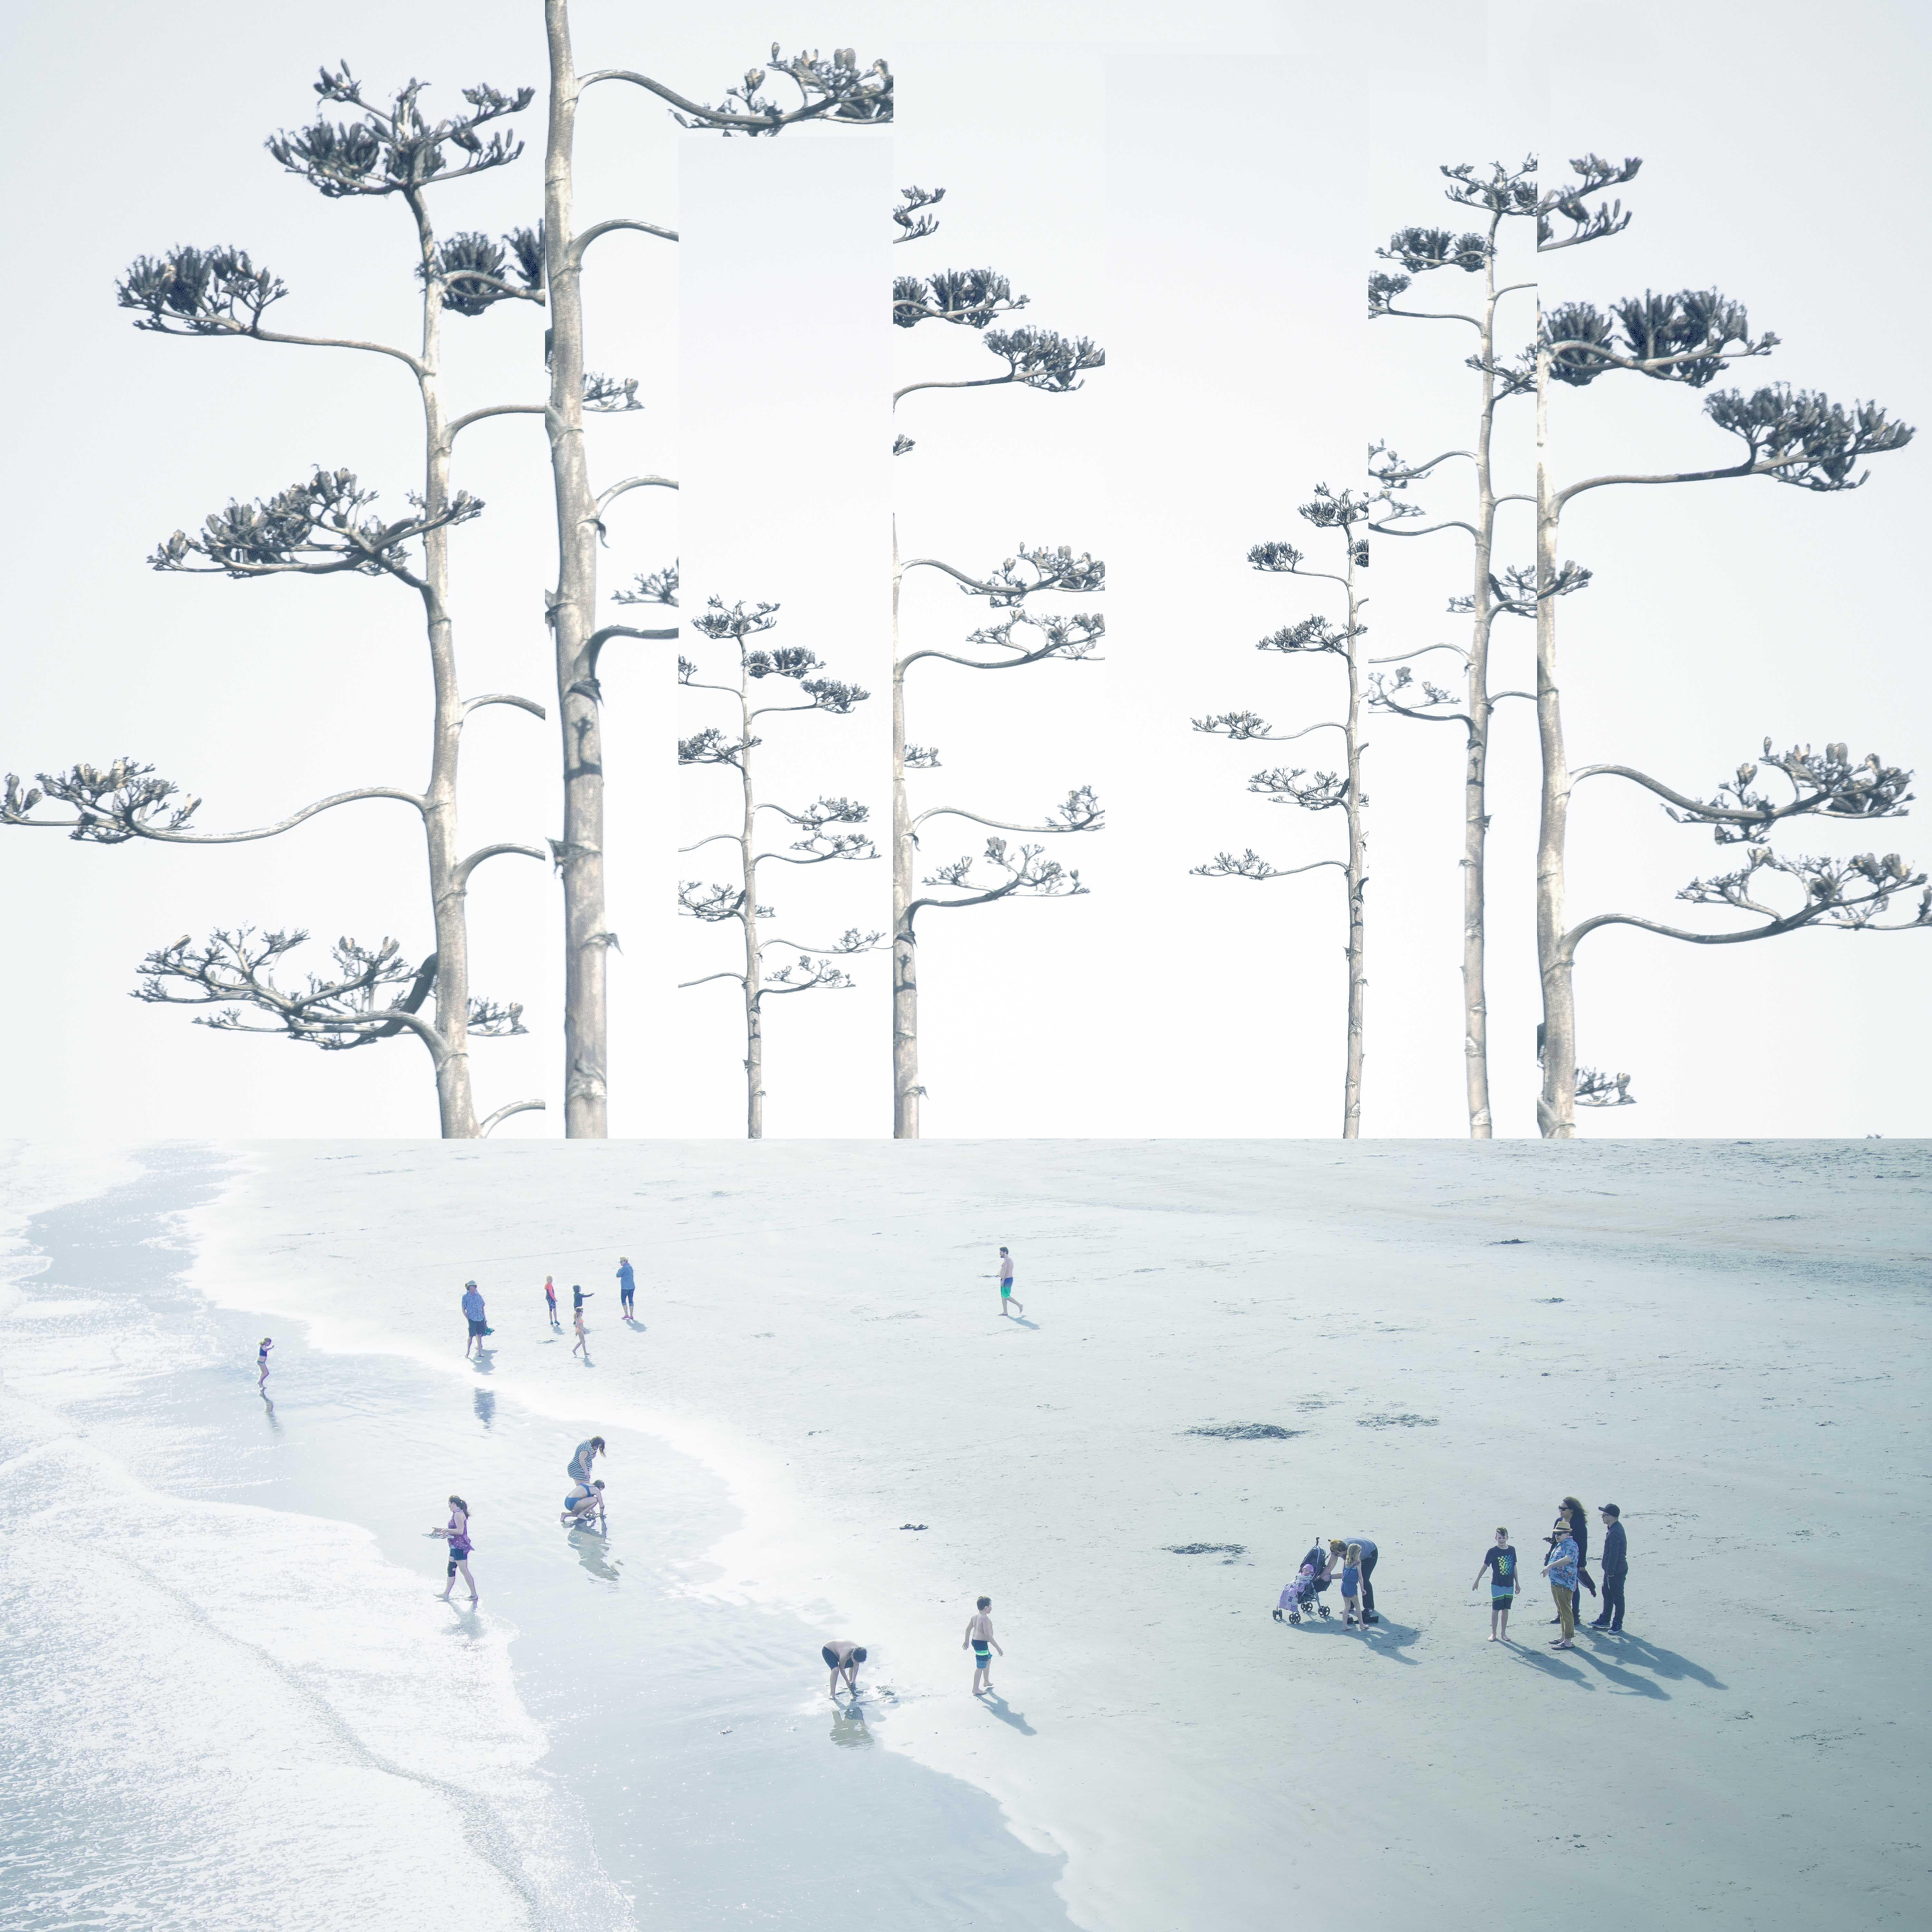 Mark Bartkiw Color Photograph - Sanctuary - beach, trees, people, abstract, manipulated, photograph on dibond